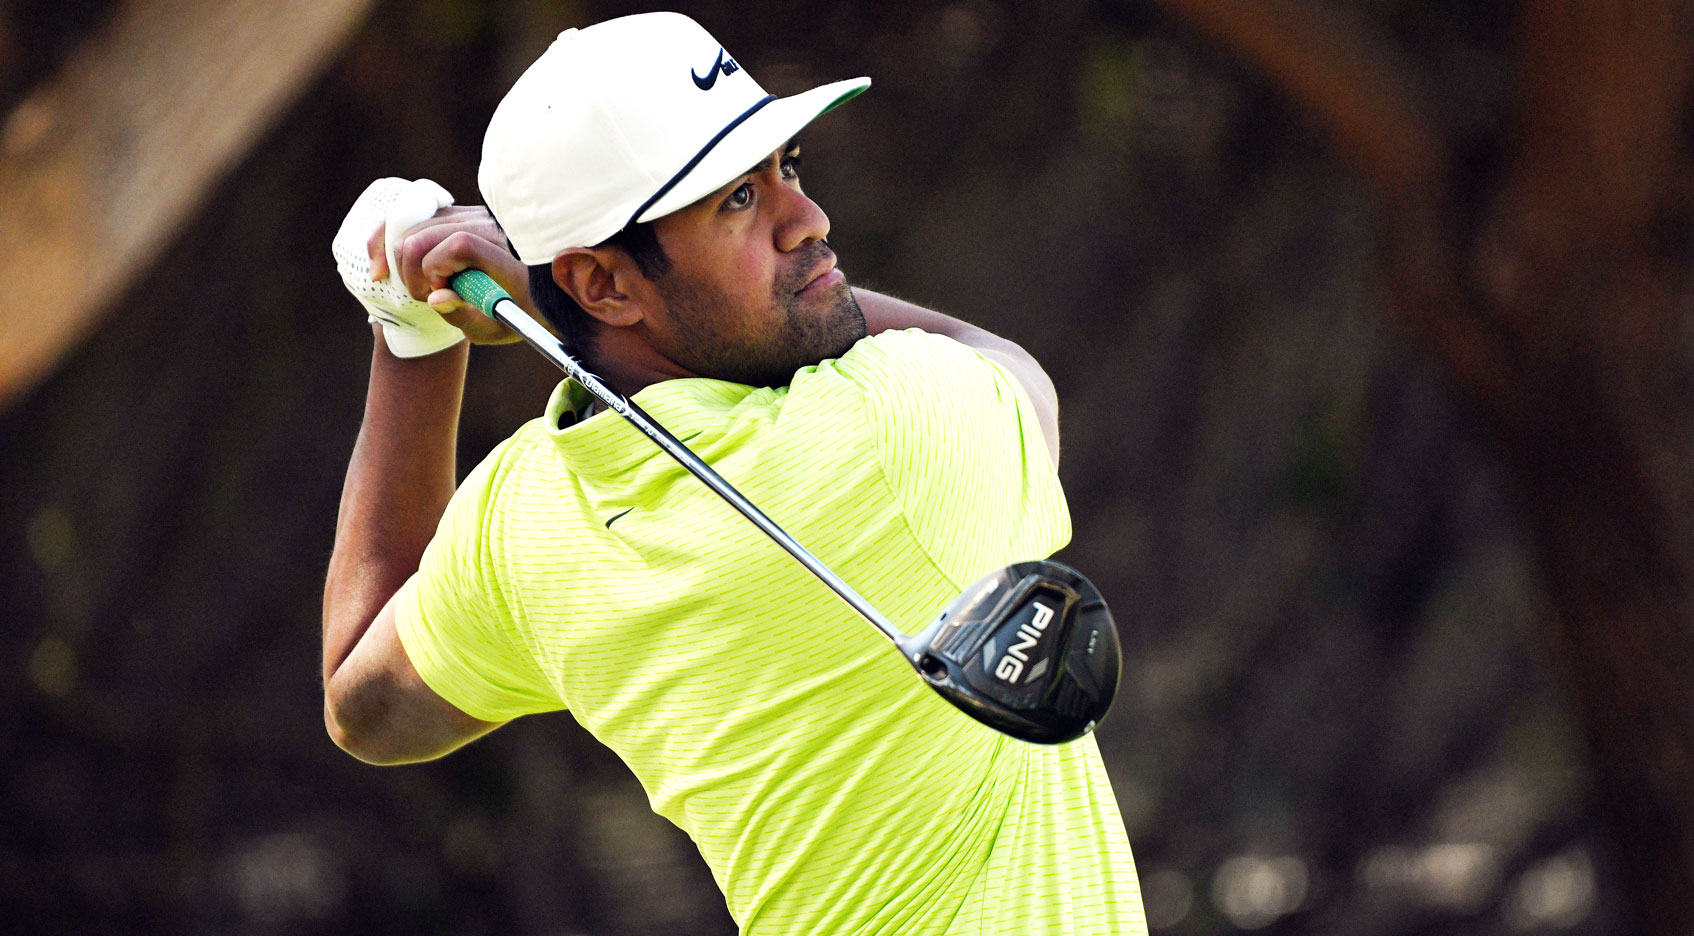 Tony Finau keeps looking forward after another close call